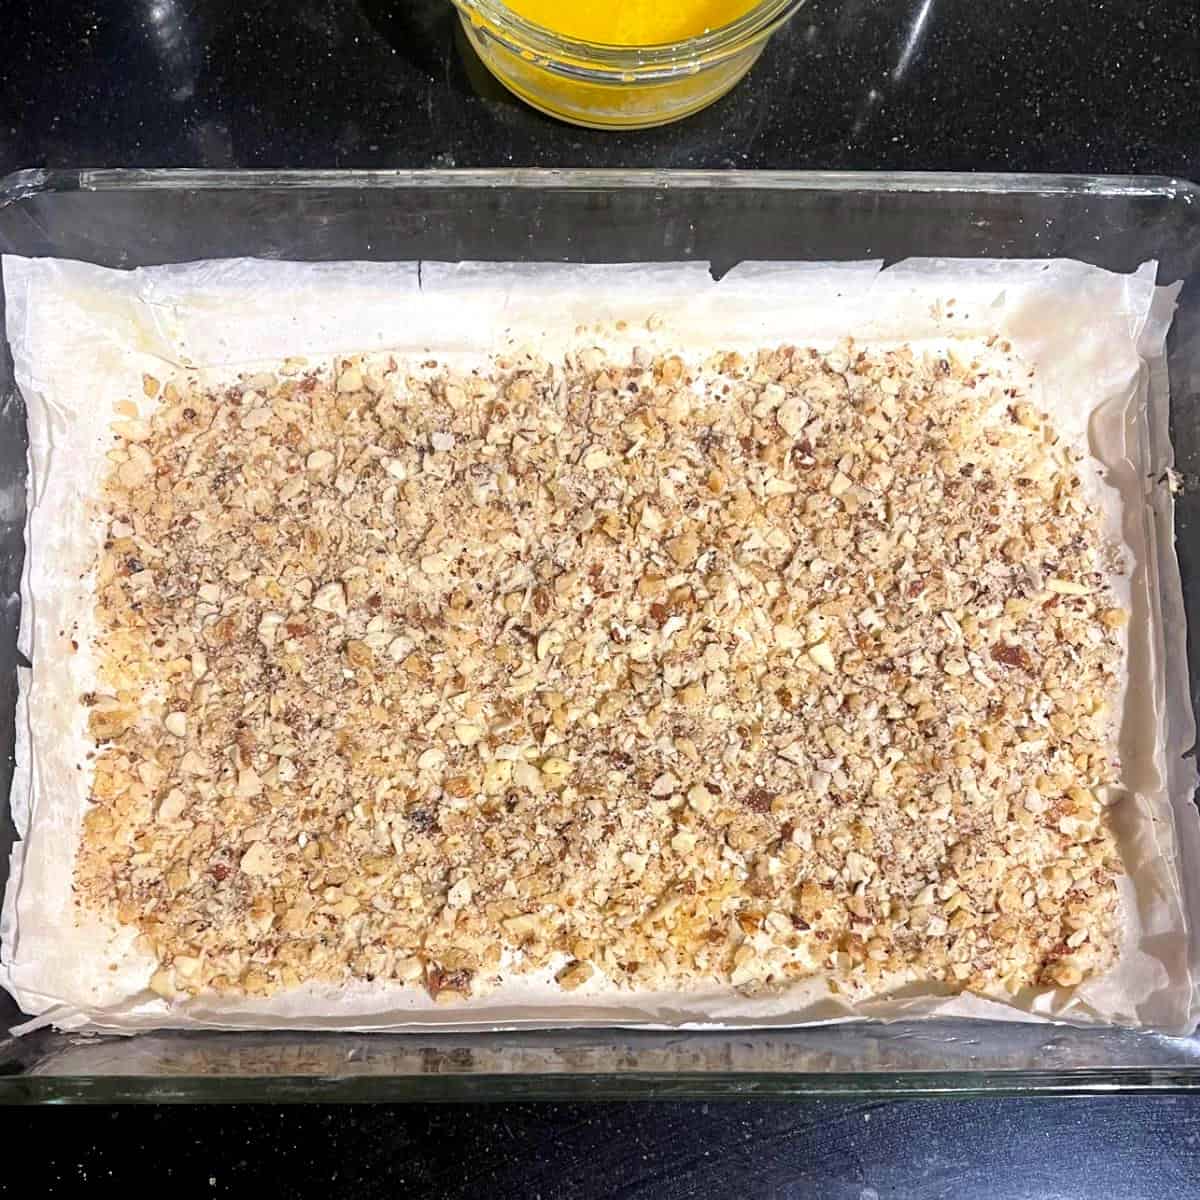 Nuts layered over filo pastry in baking sheet.